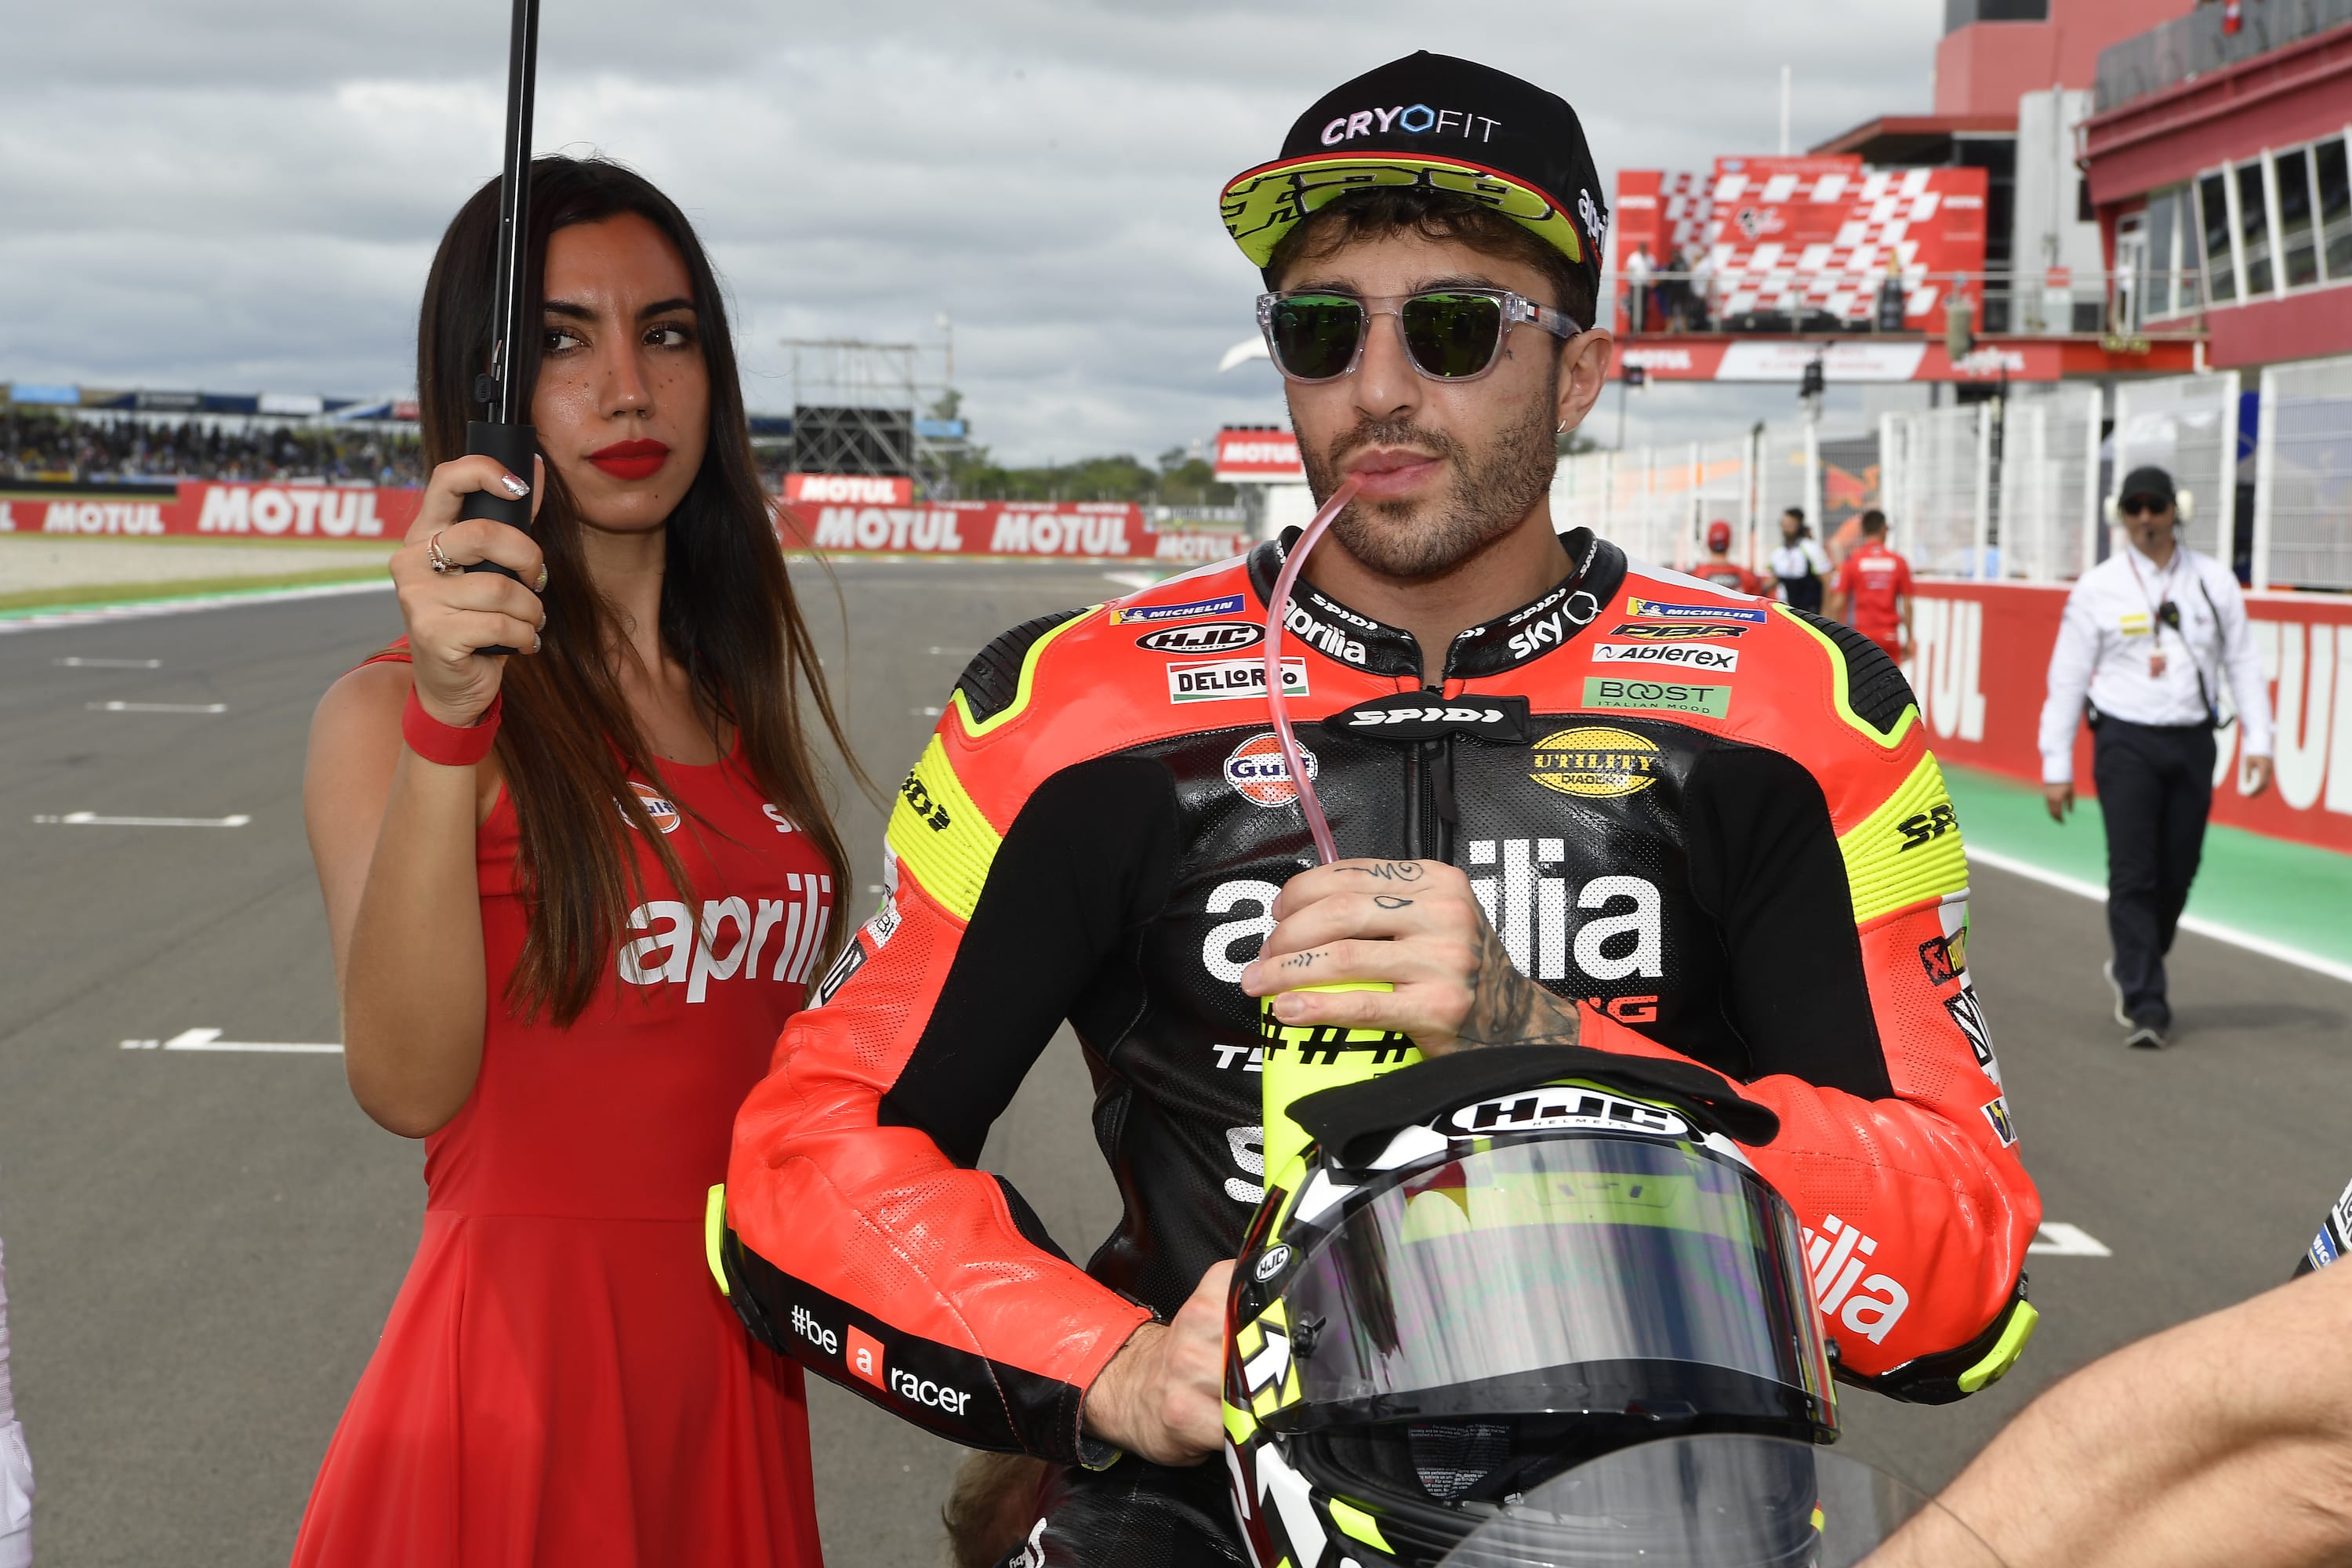 Decision on doping accusations against Andrea Iannone postponed
- also in the App MOTORCYCLE NEWS